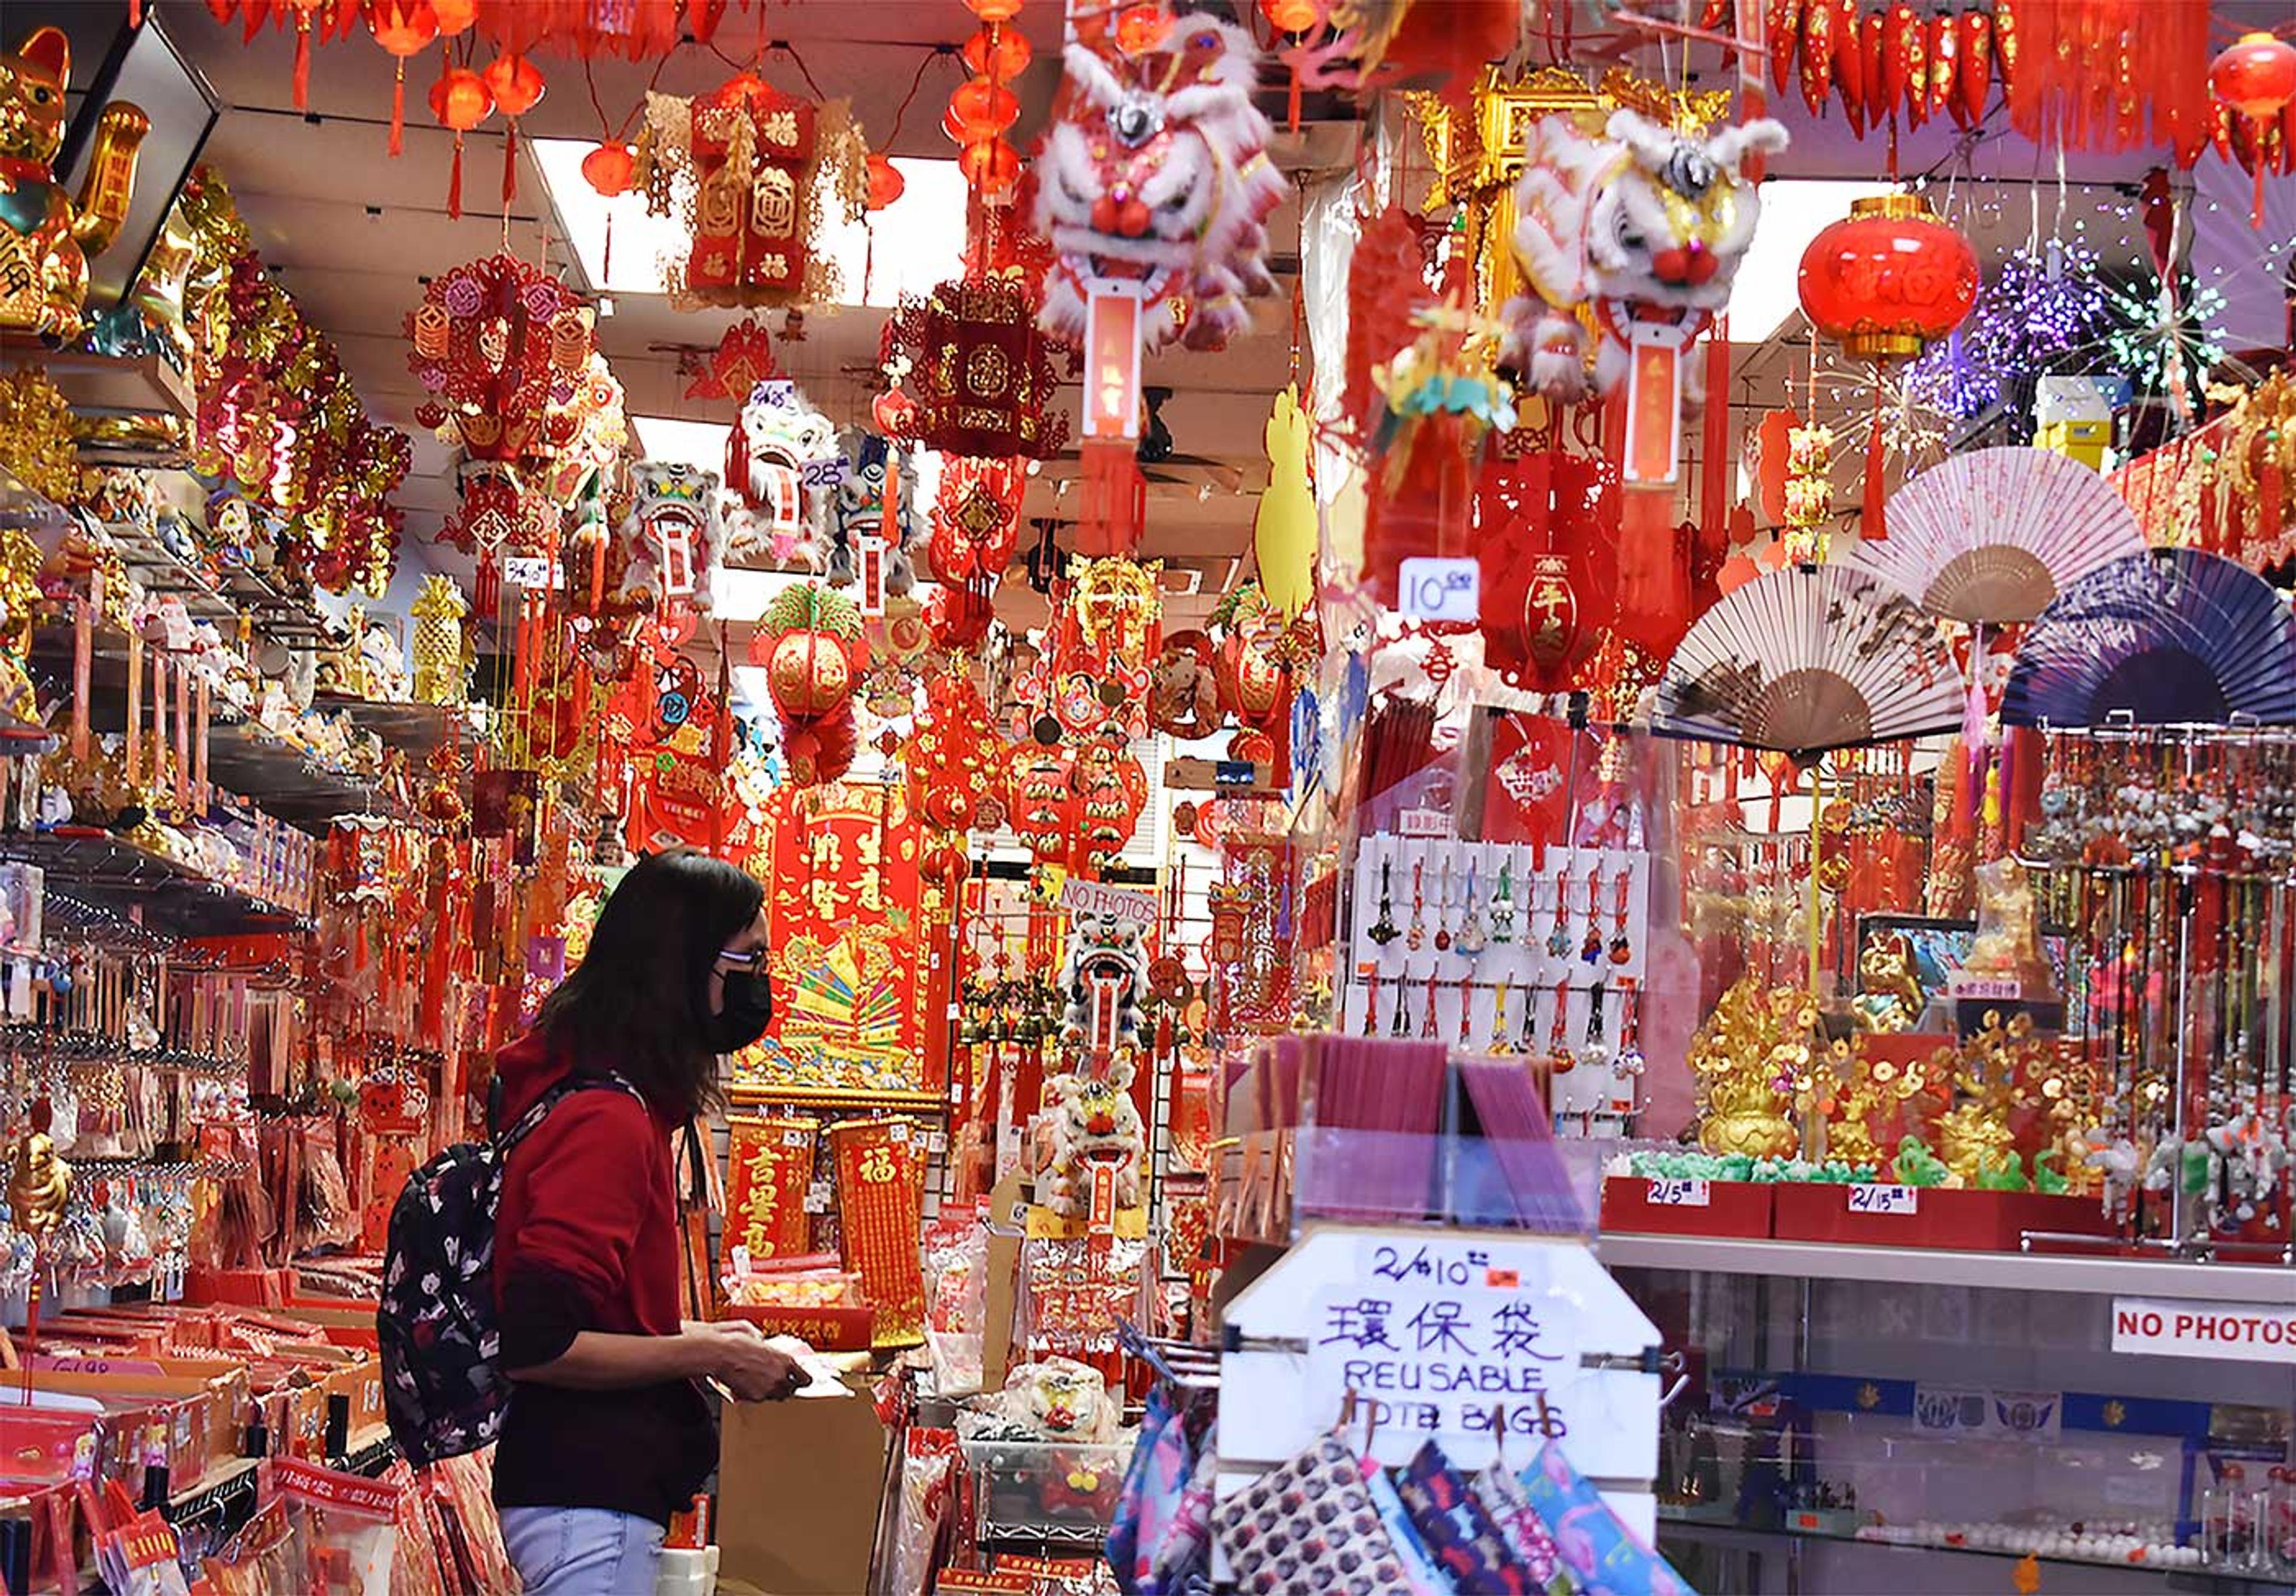 Photograph of a woman standing inside a shop surrounded by Chinese New Year decorations.